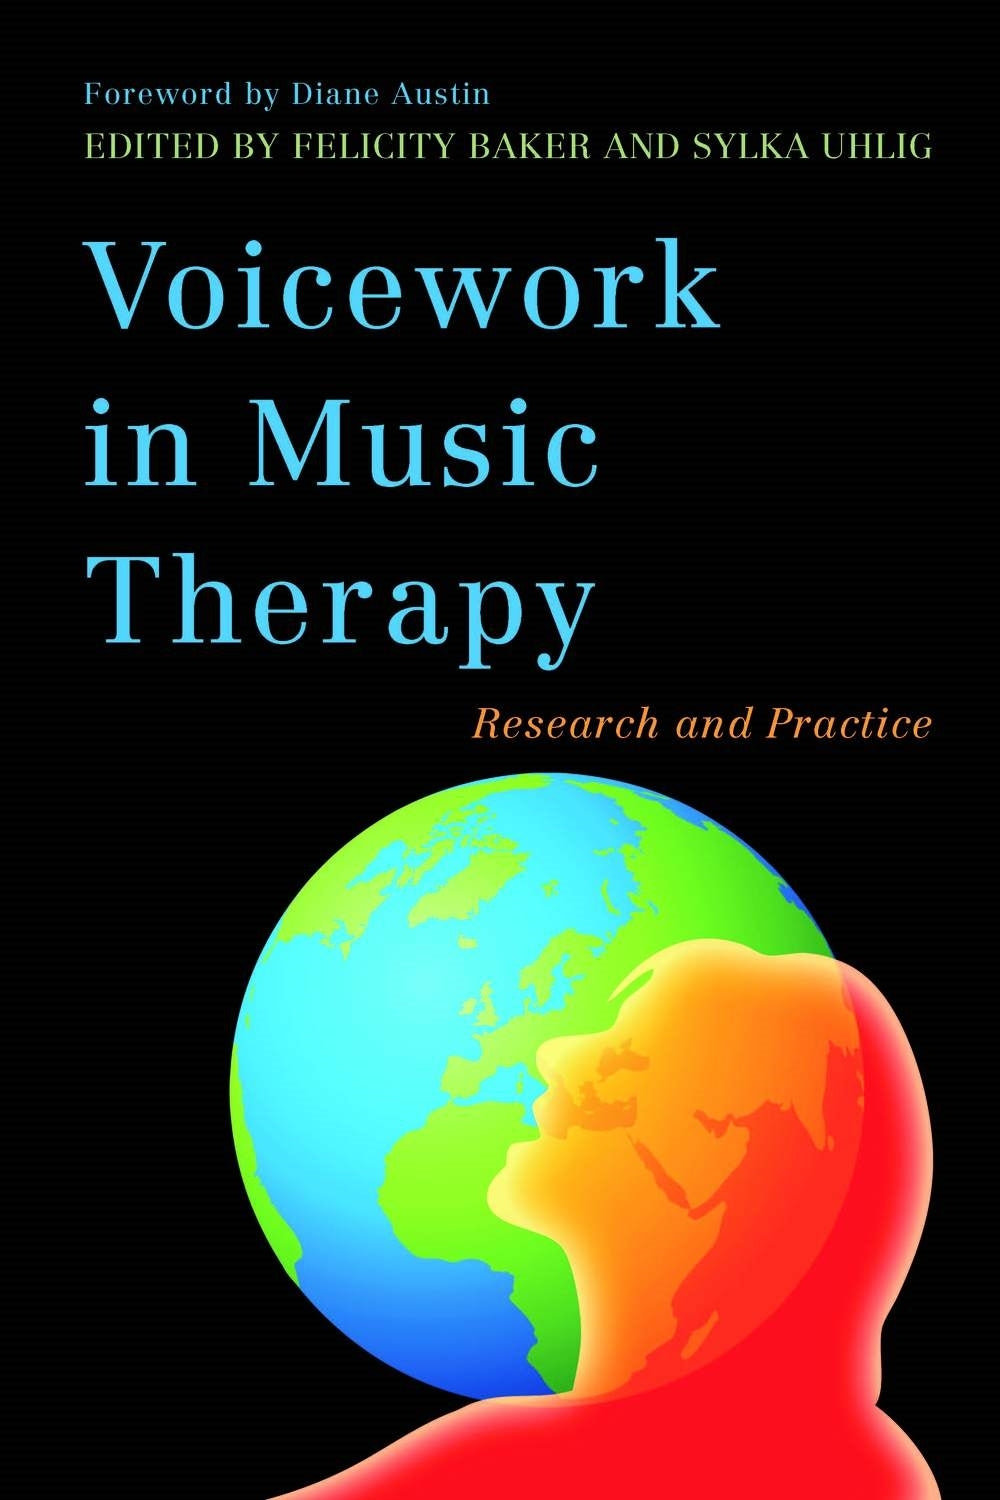 Voicework in Music Therapy by Felicity Baker, Sylka Uhlig, Diane Snow Austin, No Author Listed